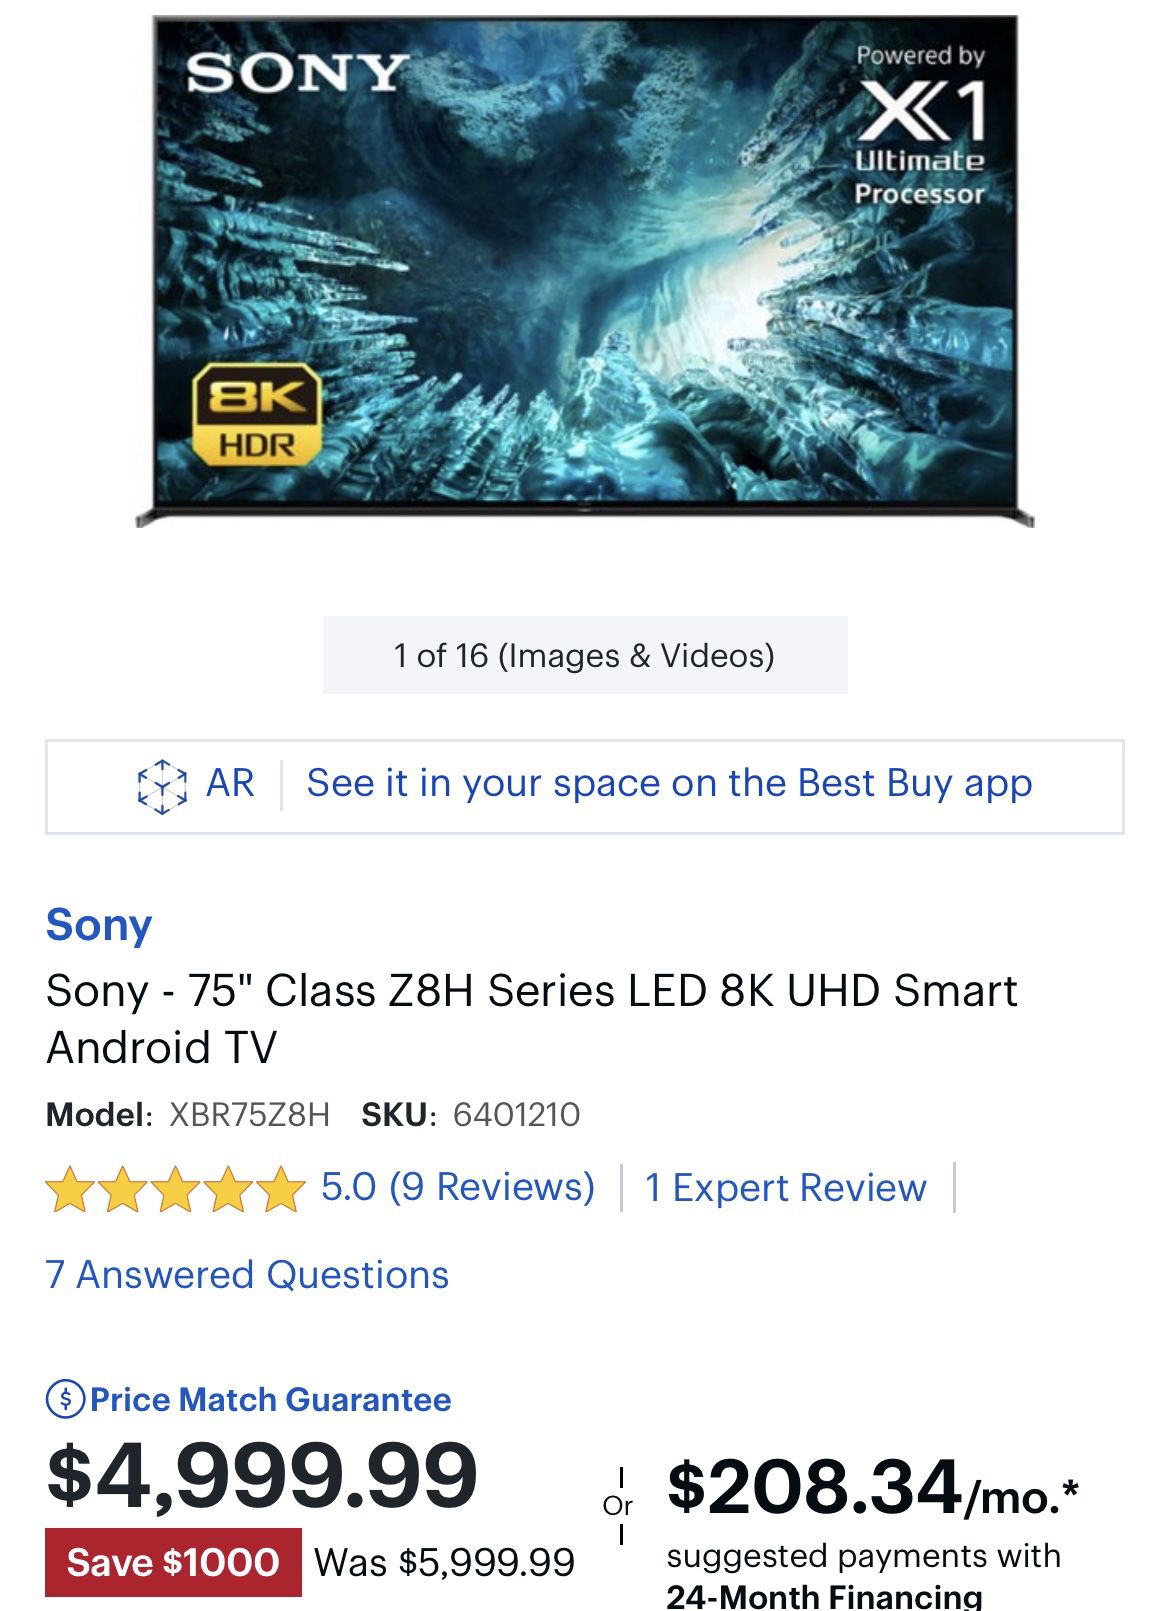 Sony-75" Class Z8H Series LED 8K UHD Smart Android TV